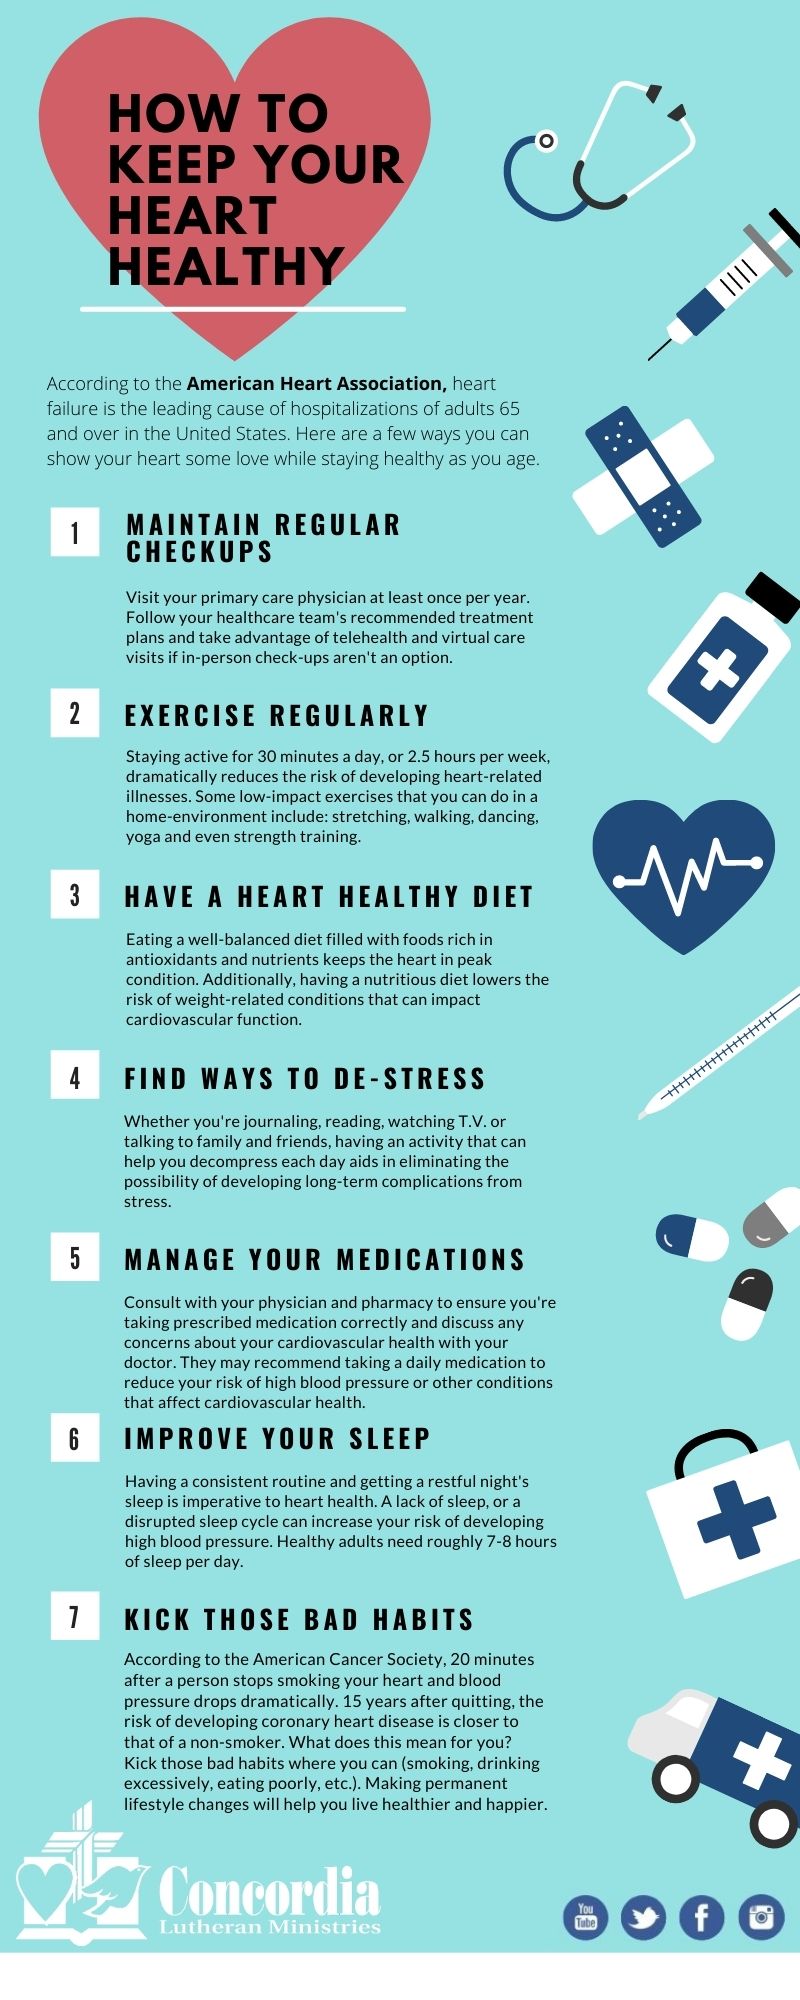 Ways to Love Your Heart: Health Tips for Seniors - Concordia Lutheran  Ministries